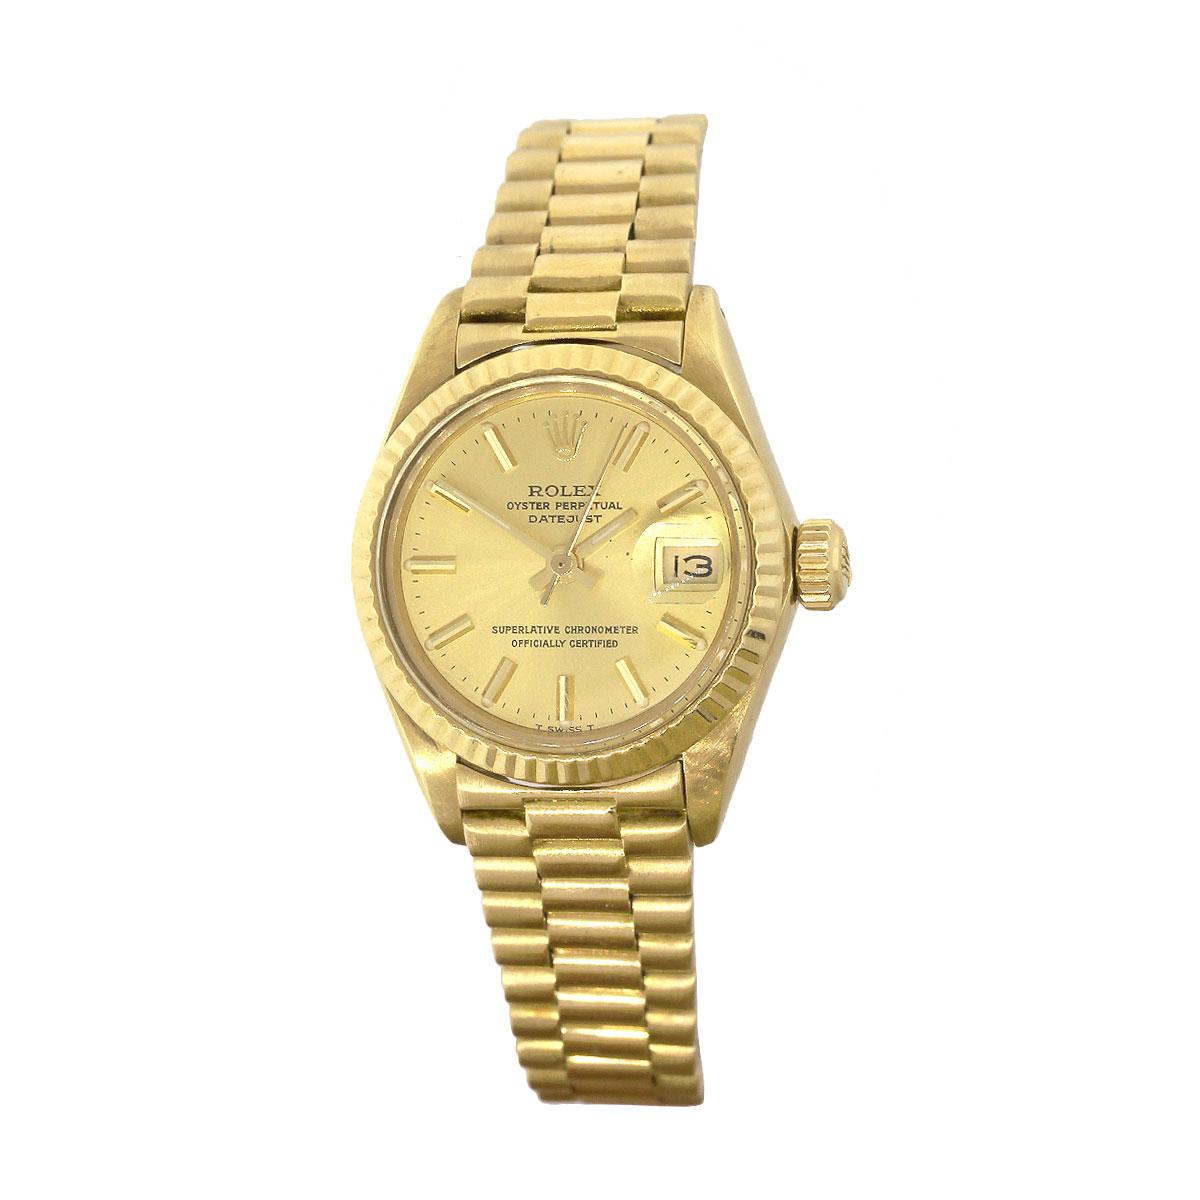 Brand: Rolex
MPN: 6917
Model: Datejust
Case Material: 18k yellow gold
Case Diameter: 26mm
Crystal: Plastic
Bezel: 18k Yellow Gold fluted bezel
Dial: Gold dial with gold stick dial markers and hands, date is displayed at 3 O’clock
Bracelet: 18k